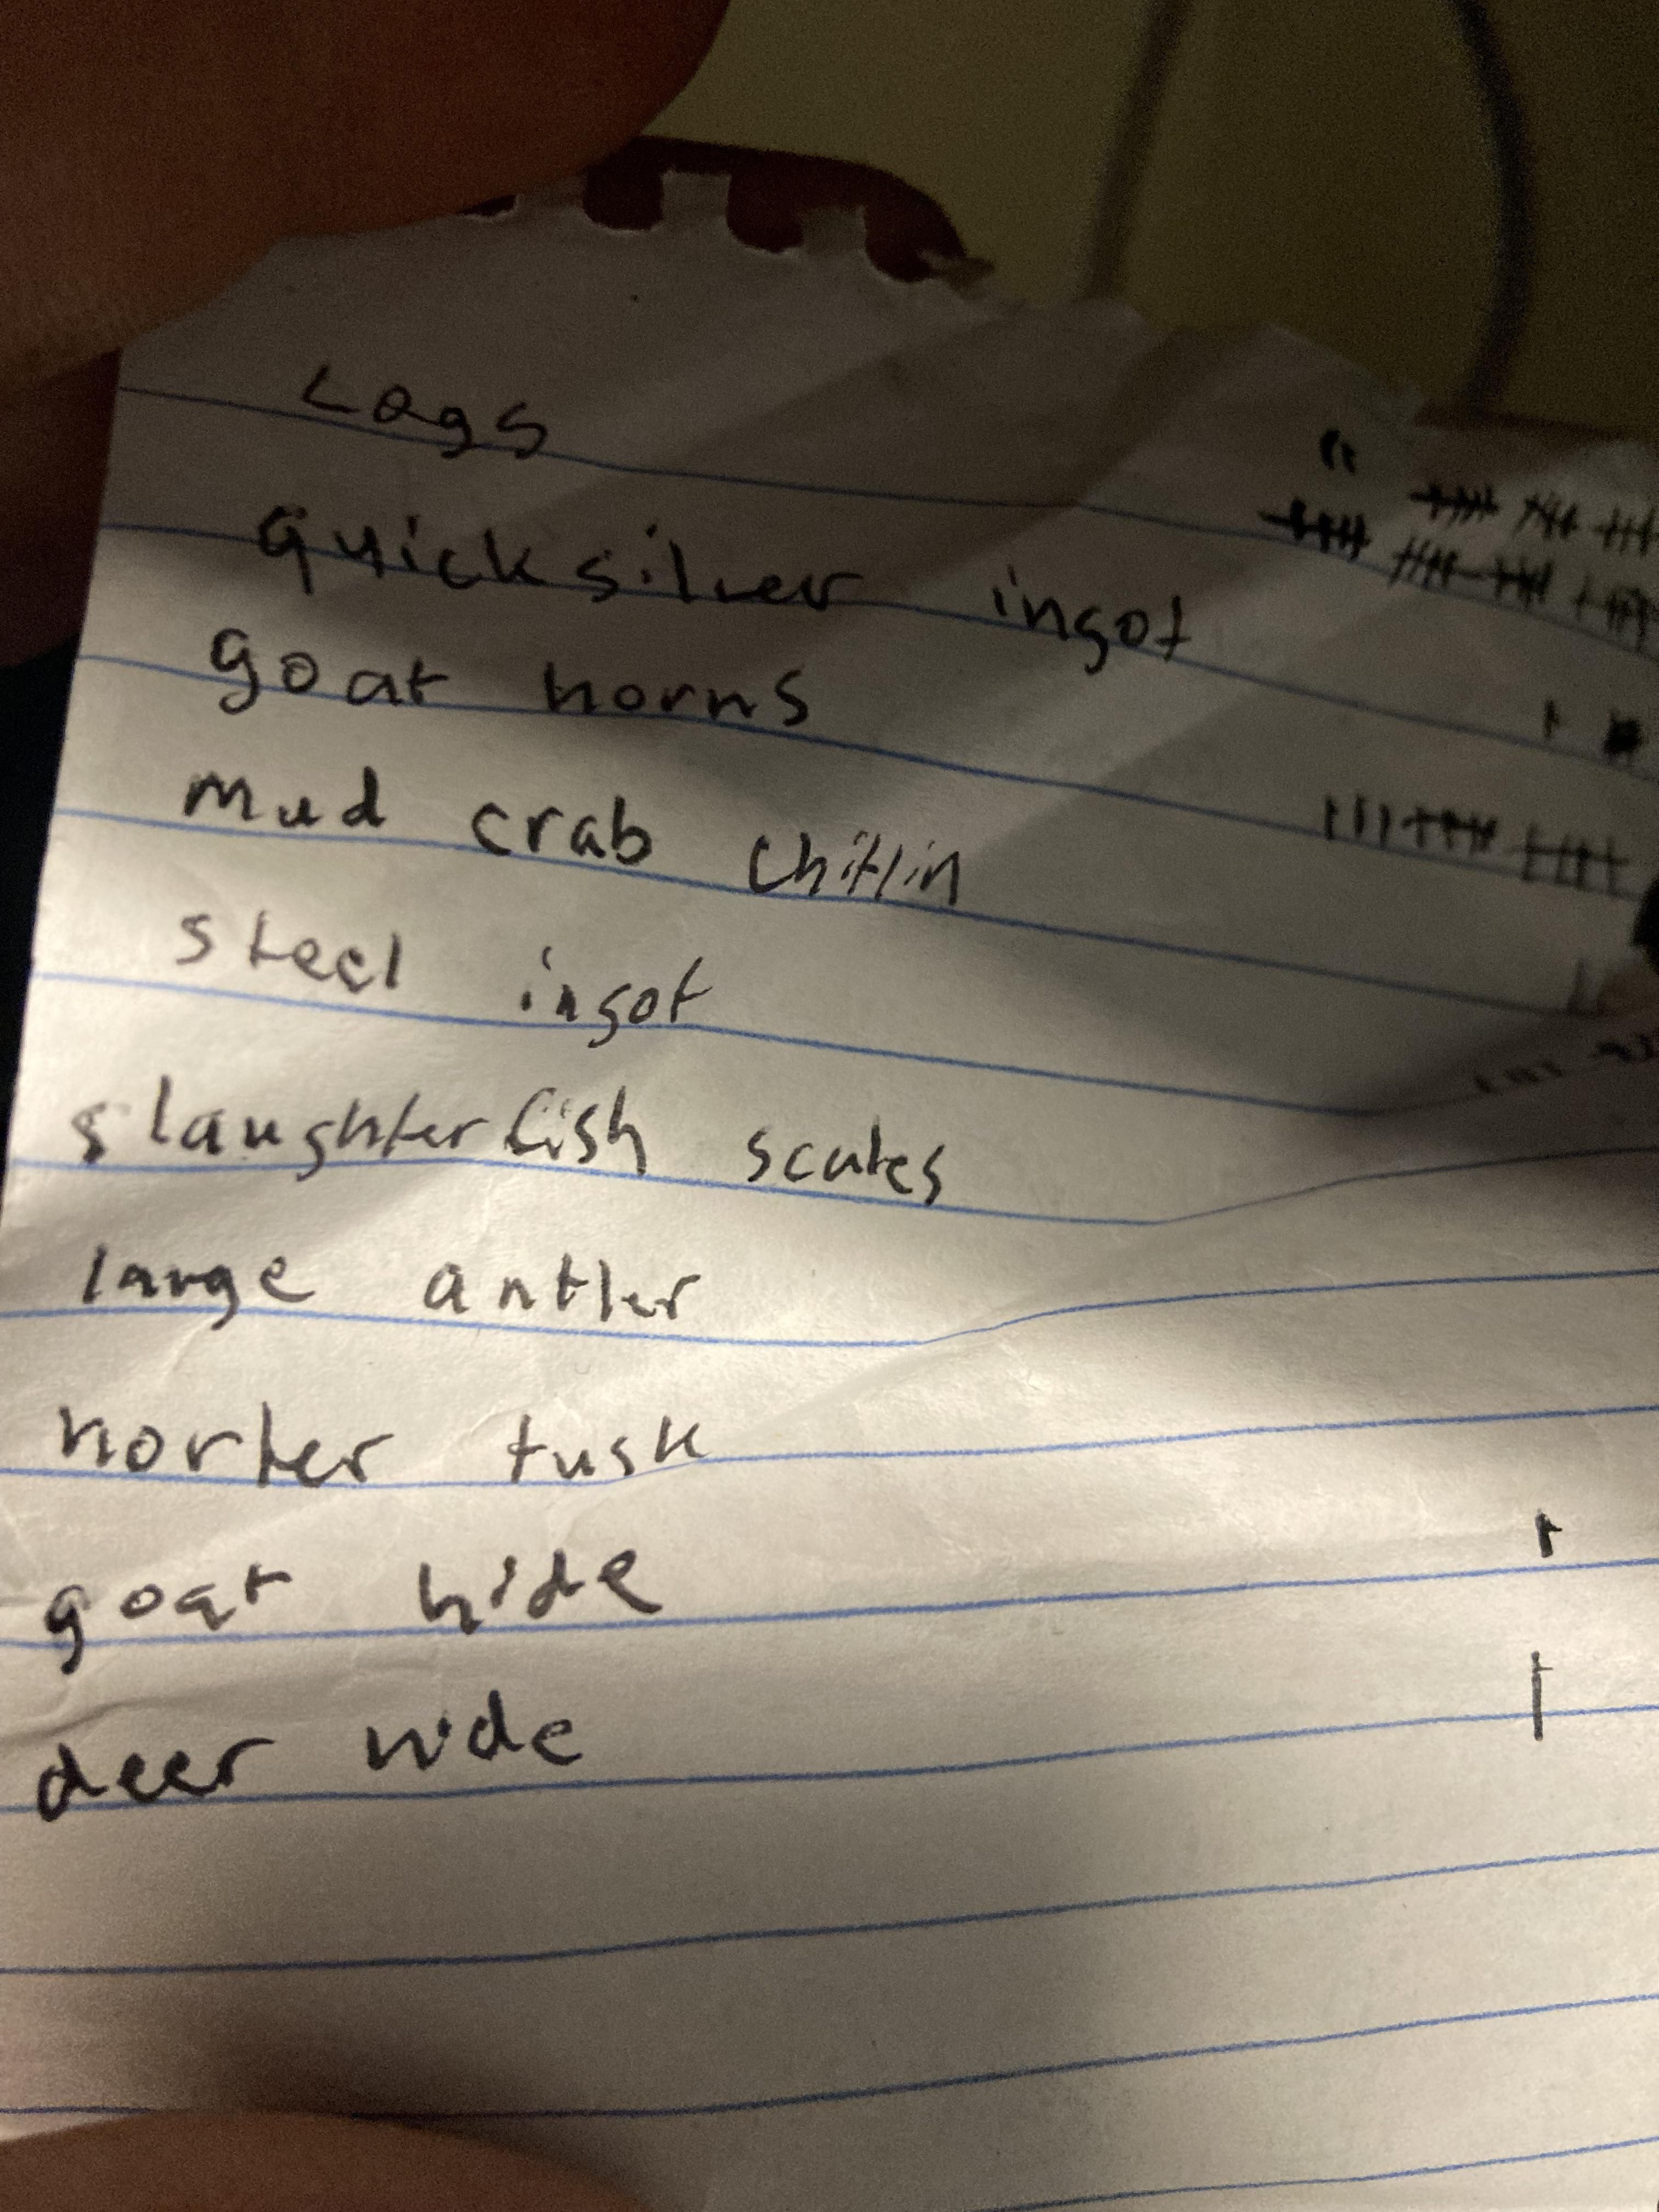 I tore out the wrong shopping list